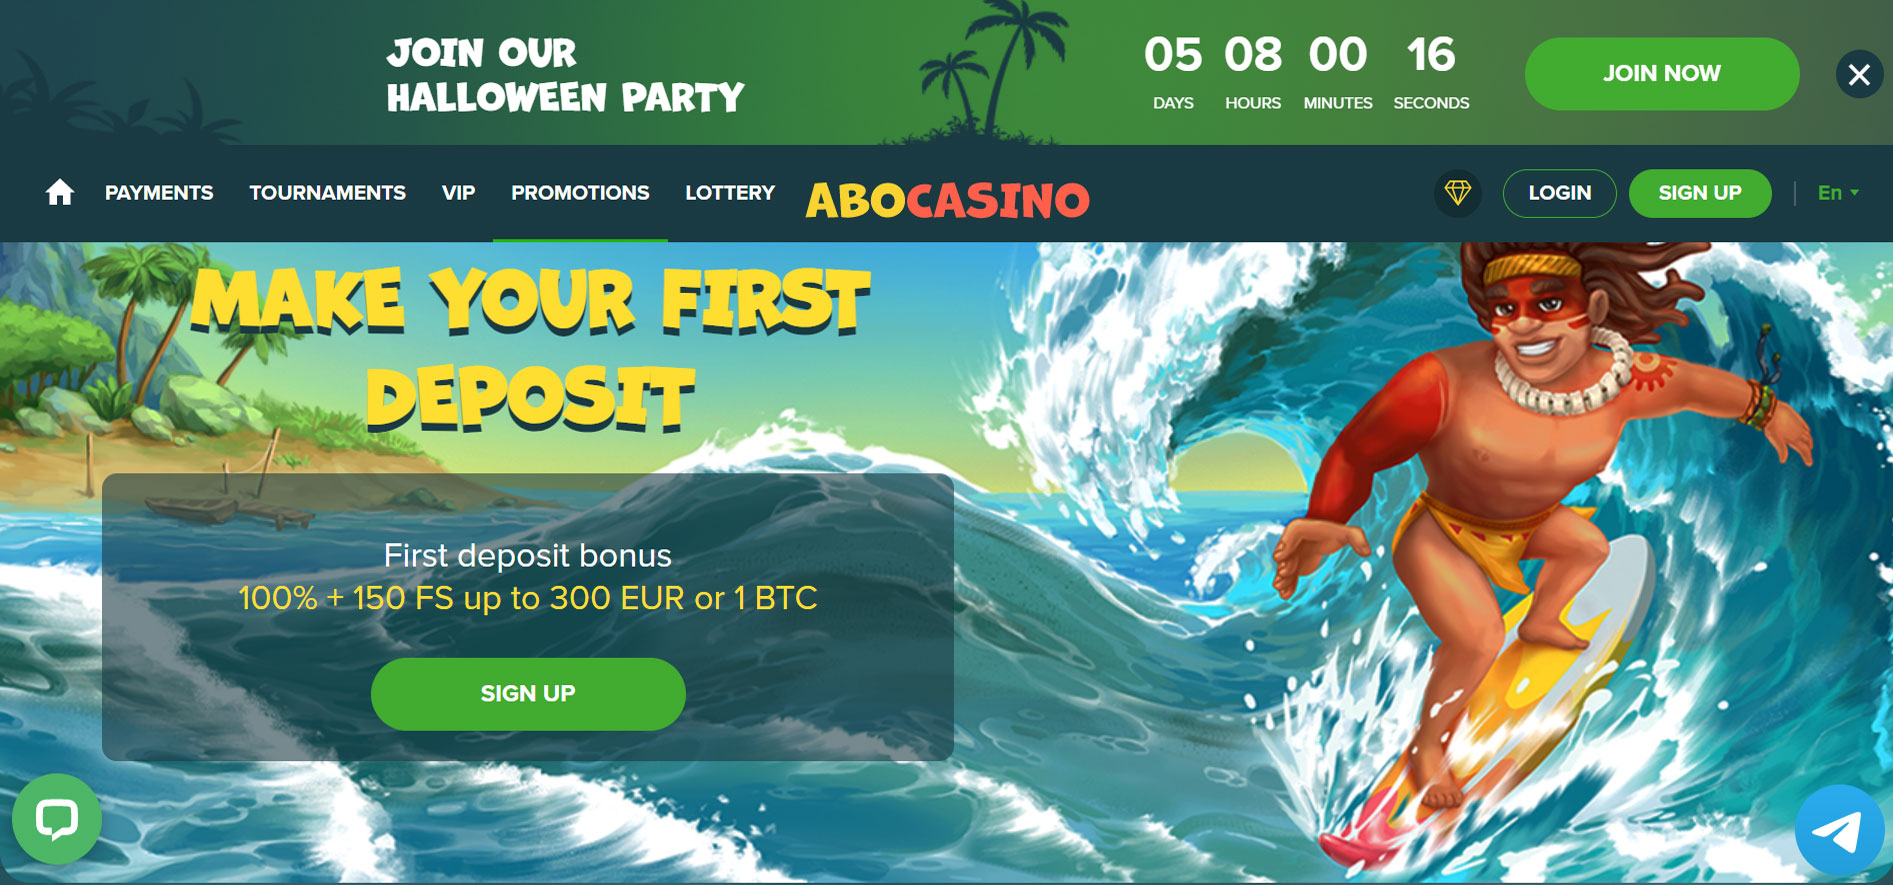 Abo Casino Promotions